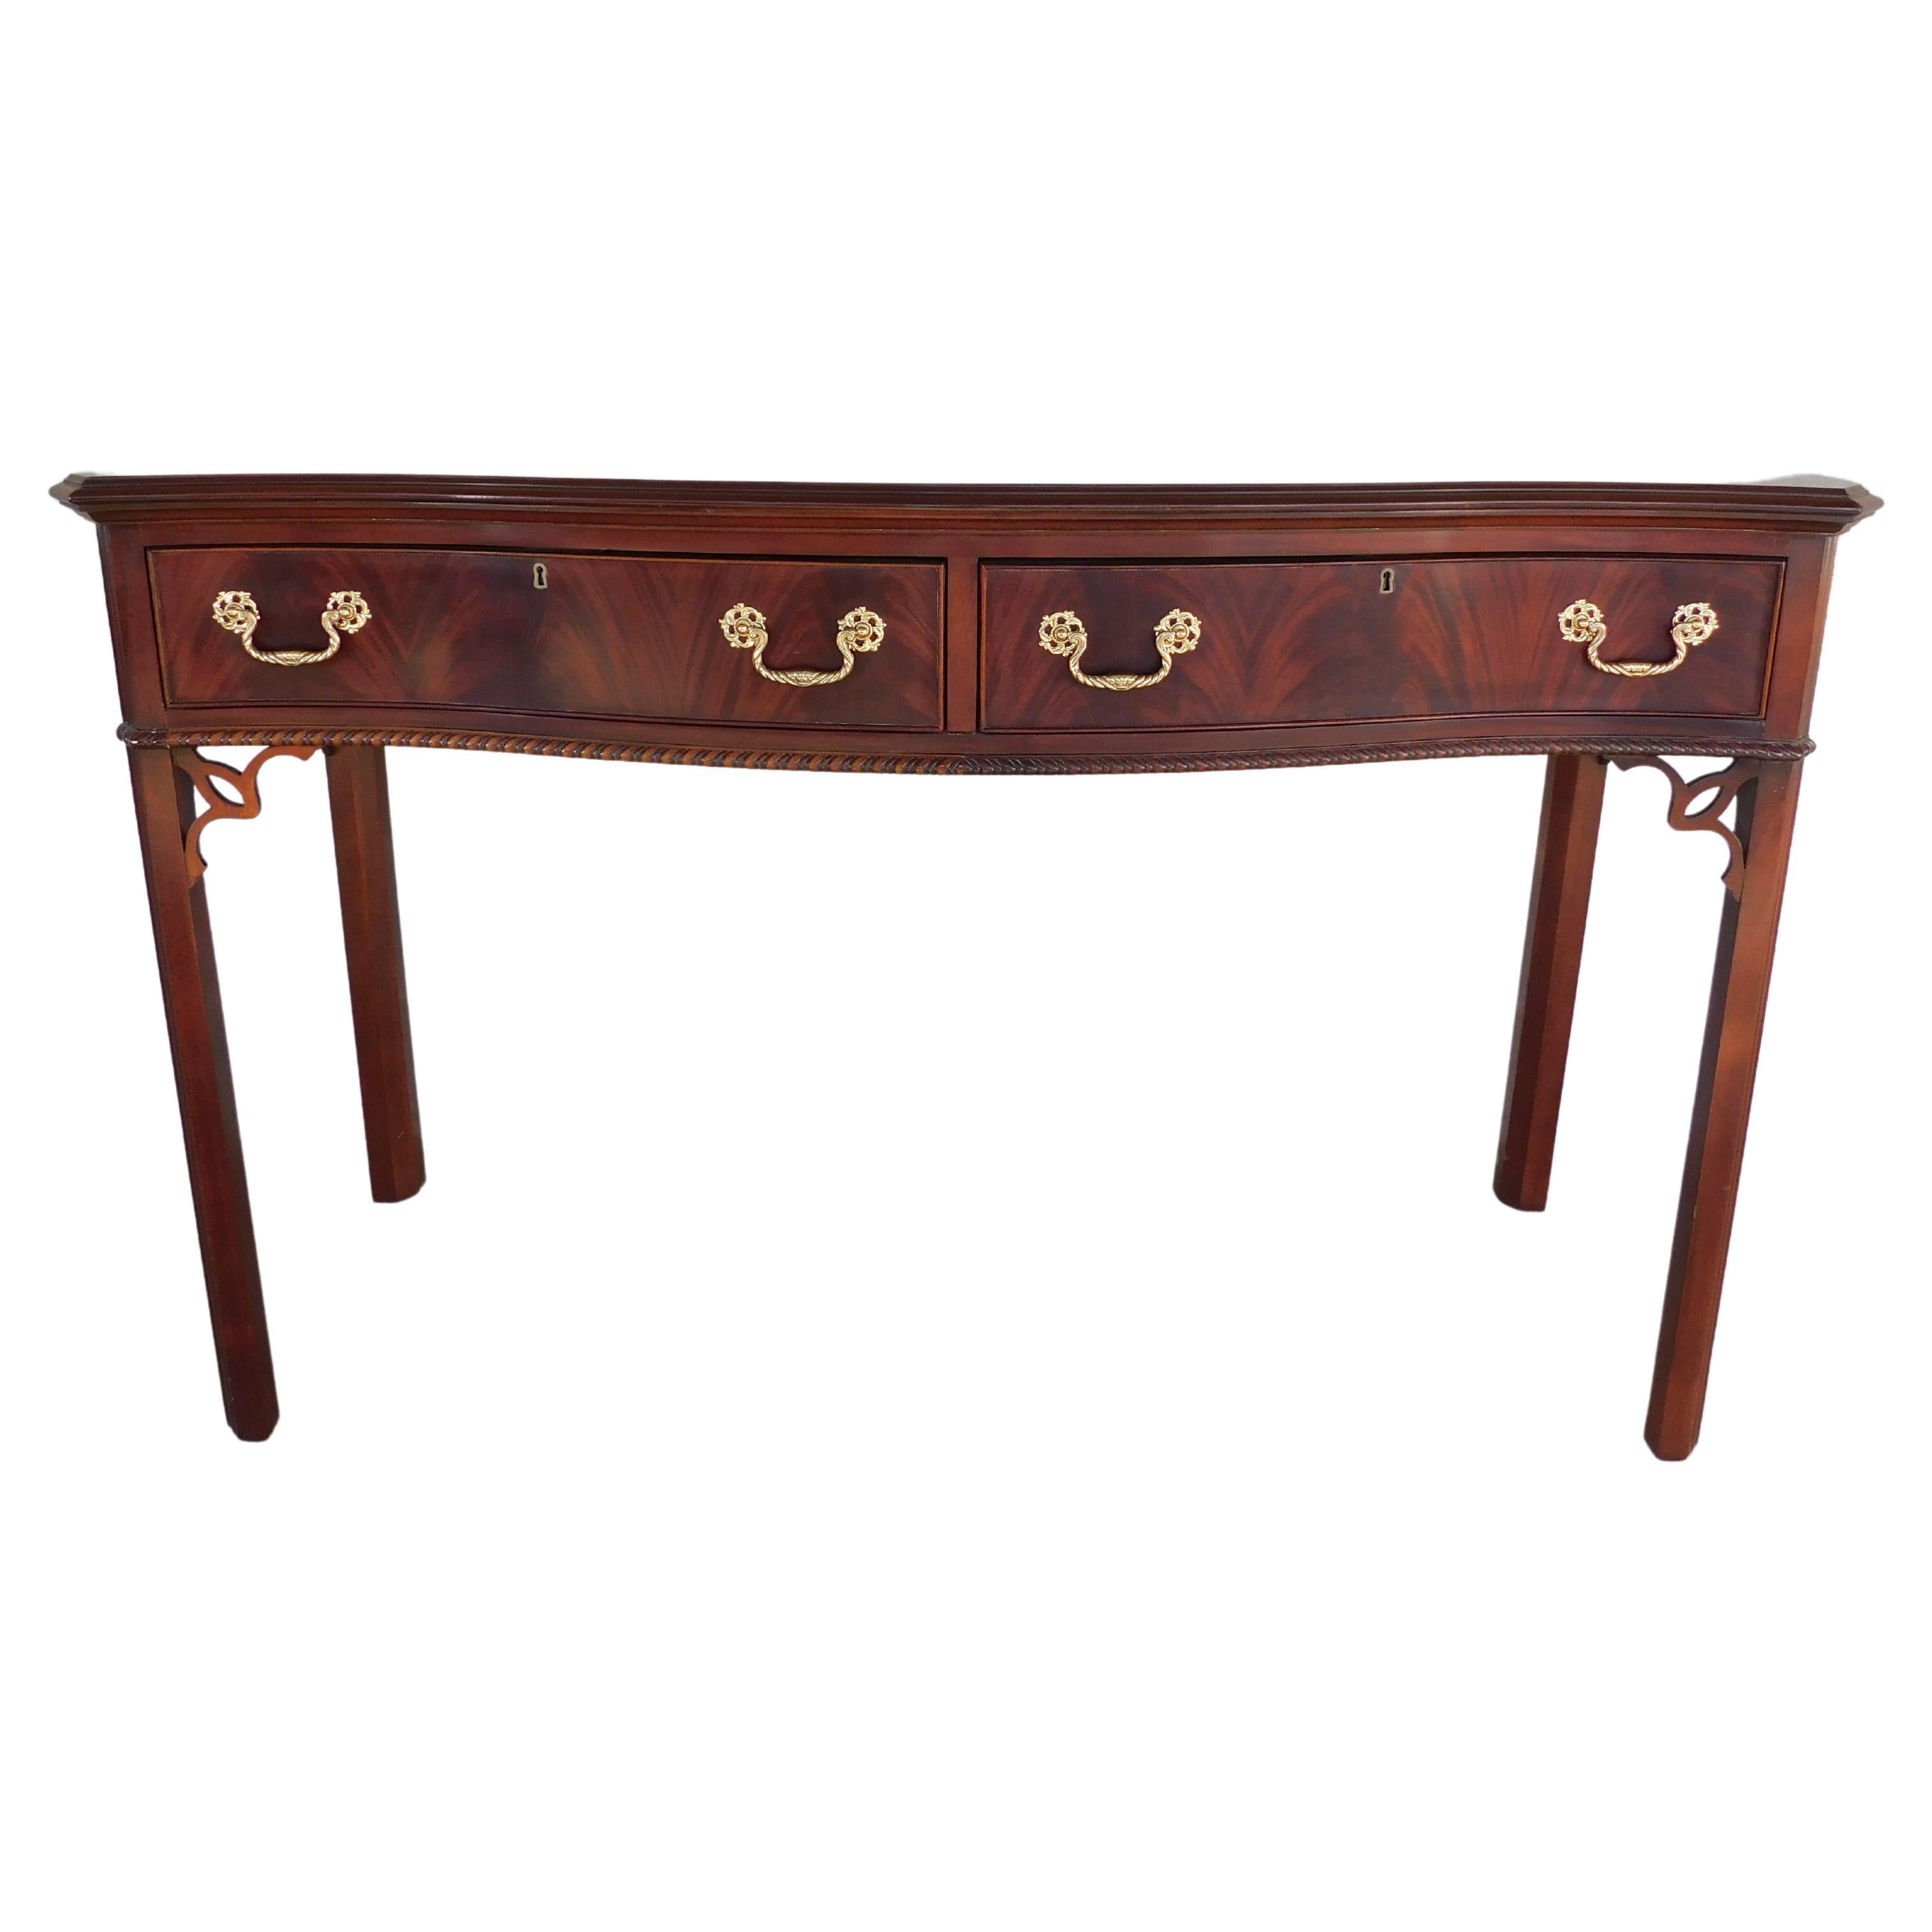 Councill Craftsmen Chinese Chippendale Style Mahogany Huntboard Server